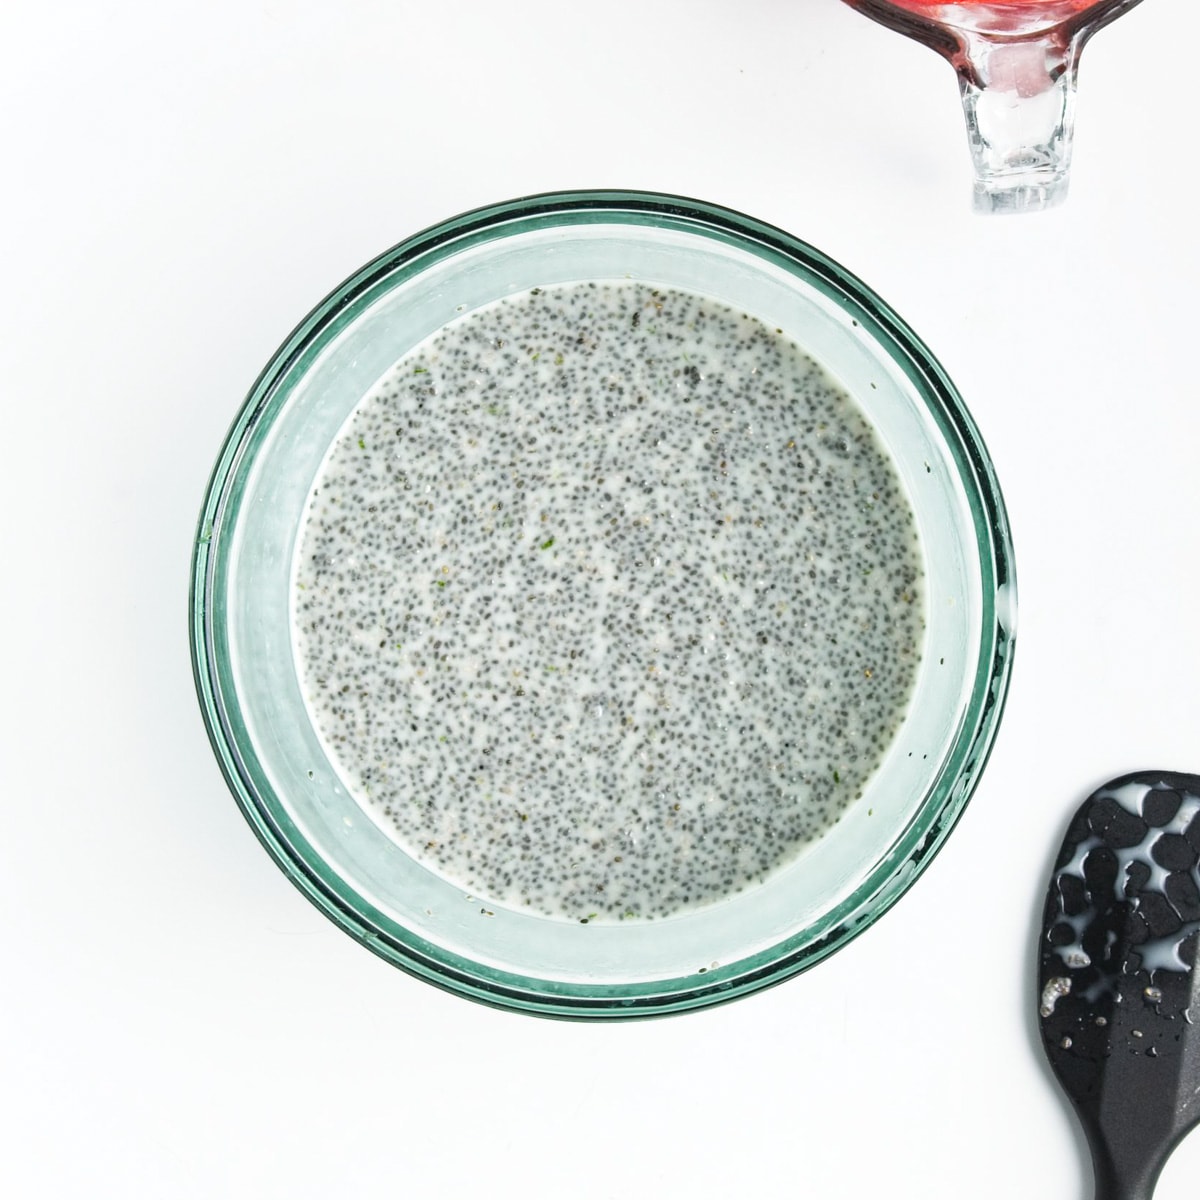 Chia pudding mix in a bowl.